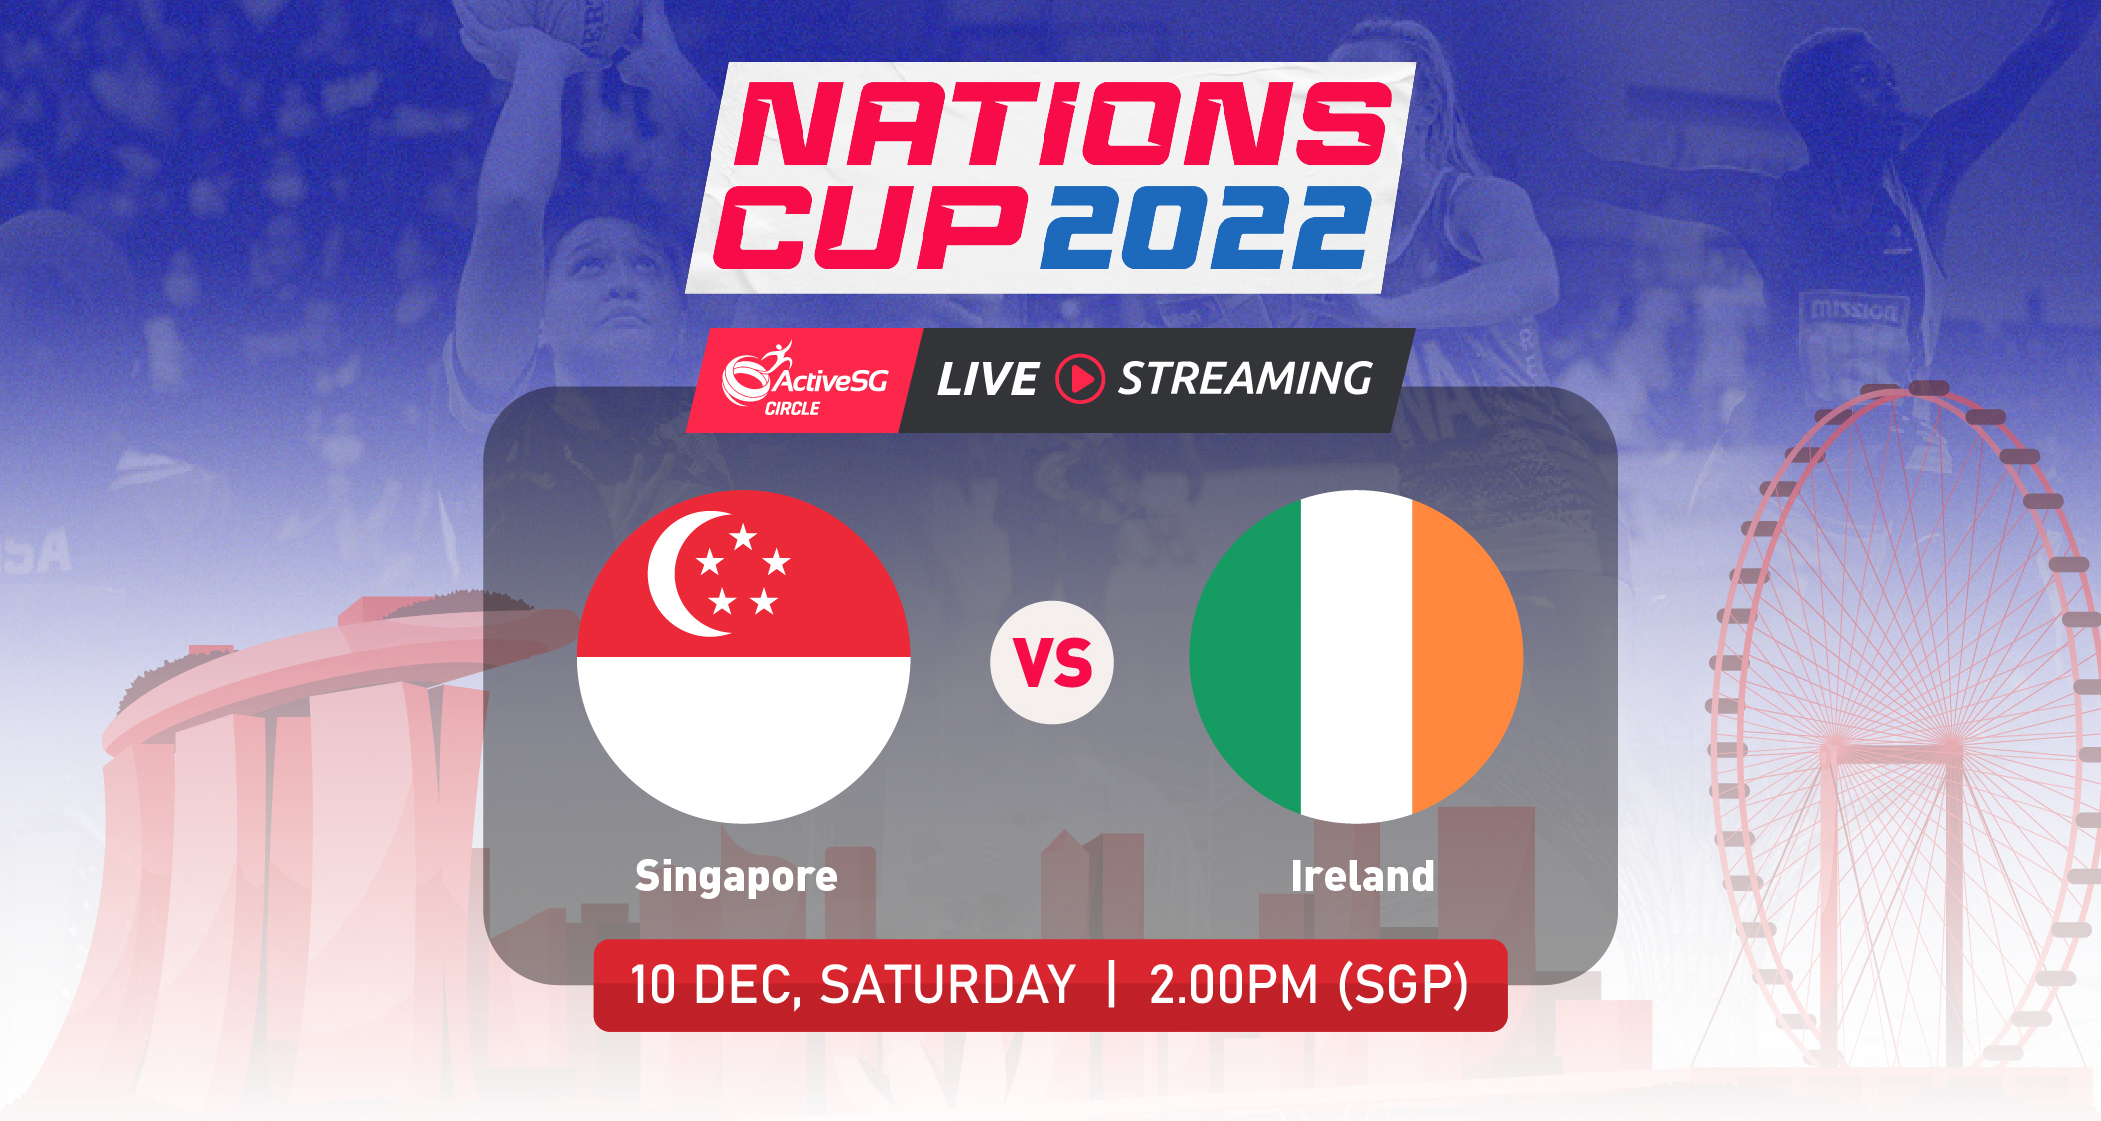 Singapore 🇸🇬 vs 🇮🇪 Ireland | Nations Cup 2022